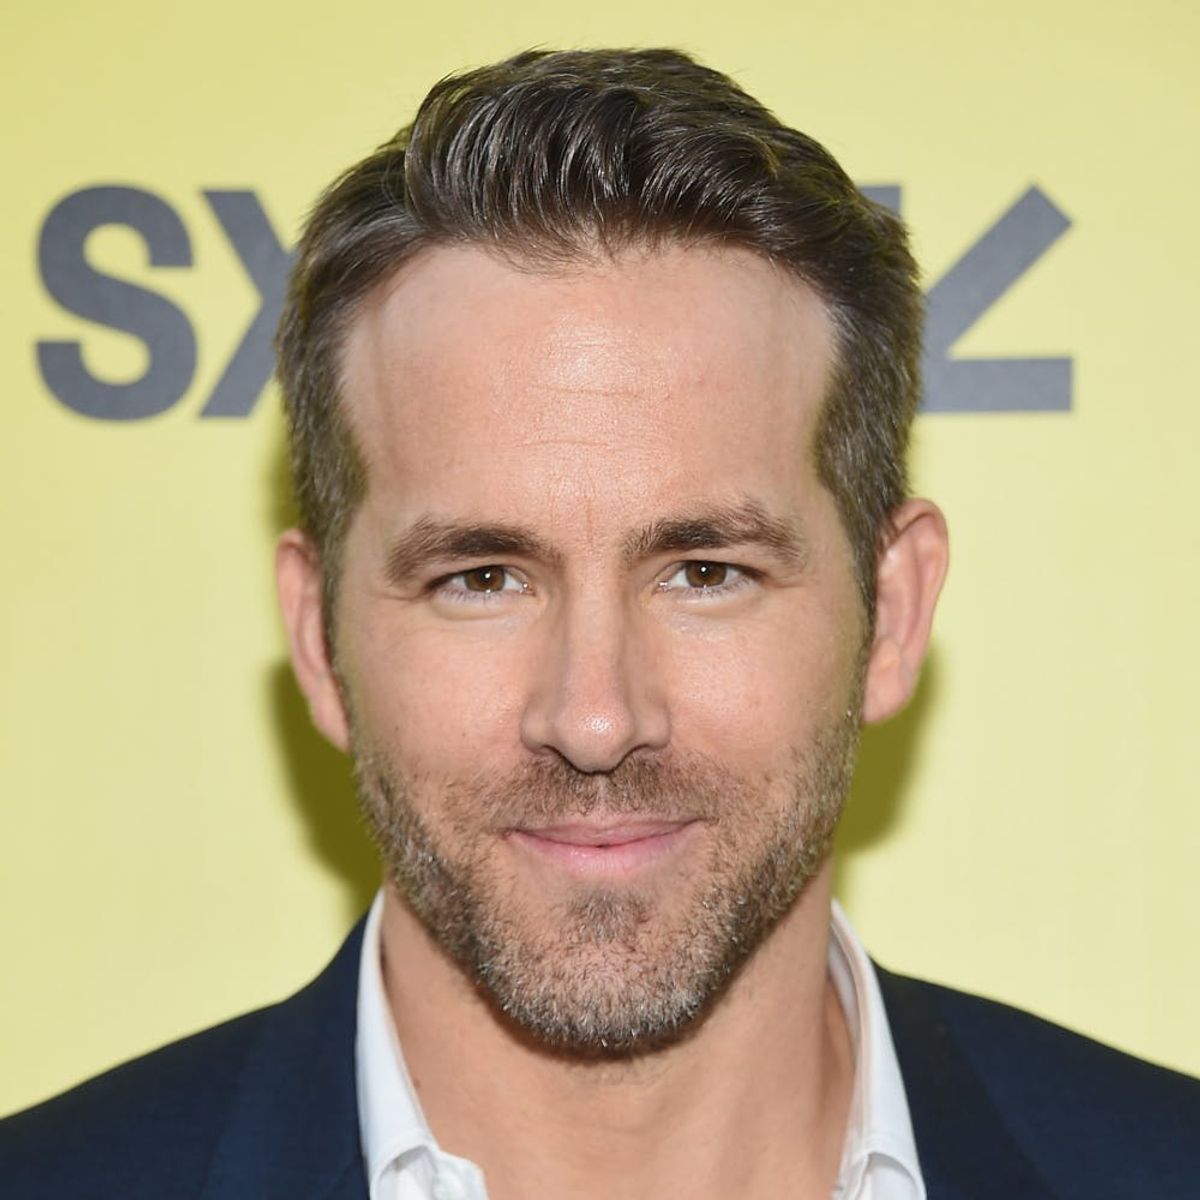 Ryan Reynolds Reveals Why He Feels “Desperate,” Despite Blake Lively’s Help With Anxiety